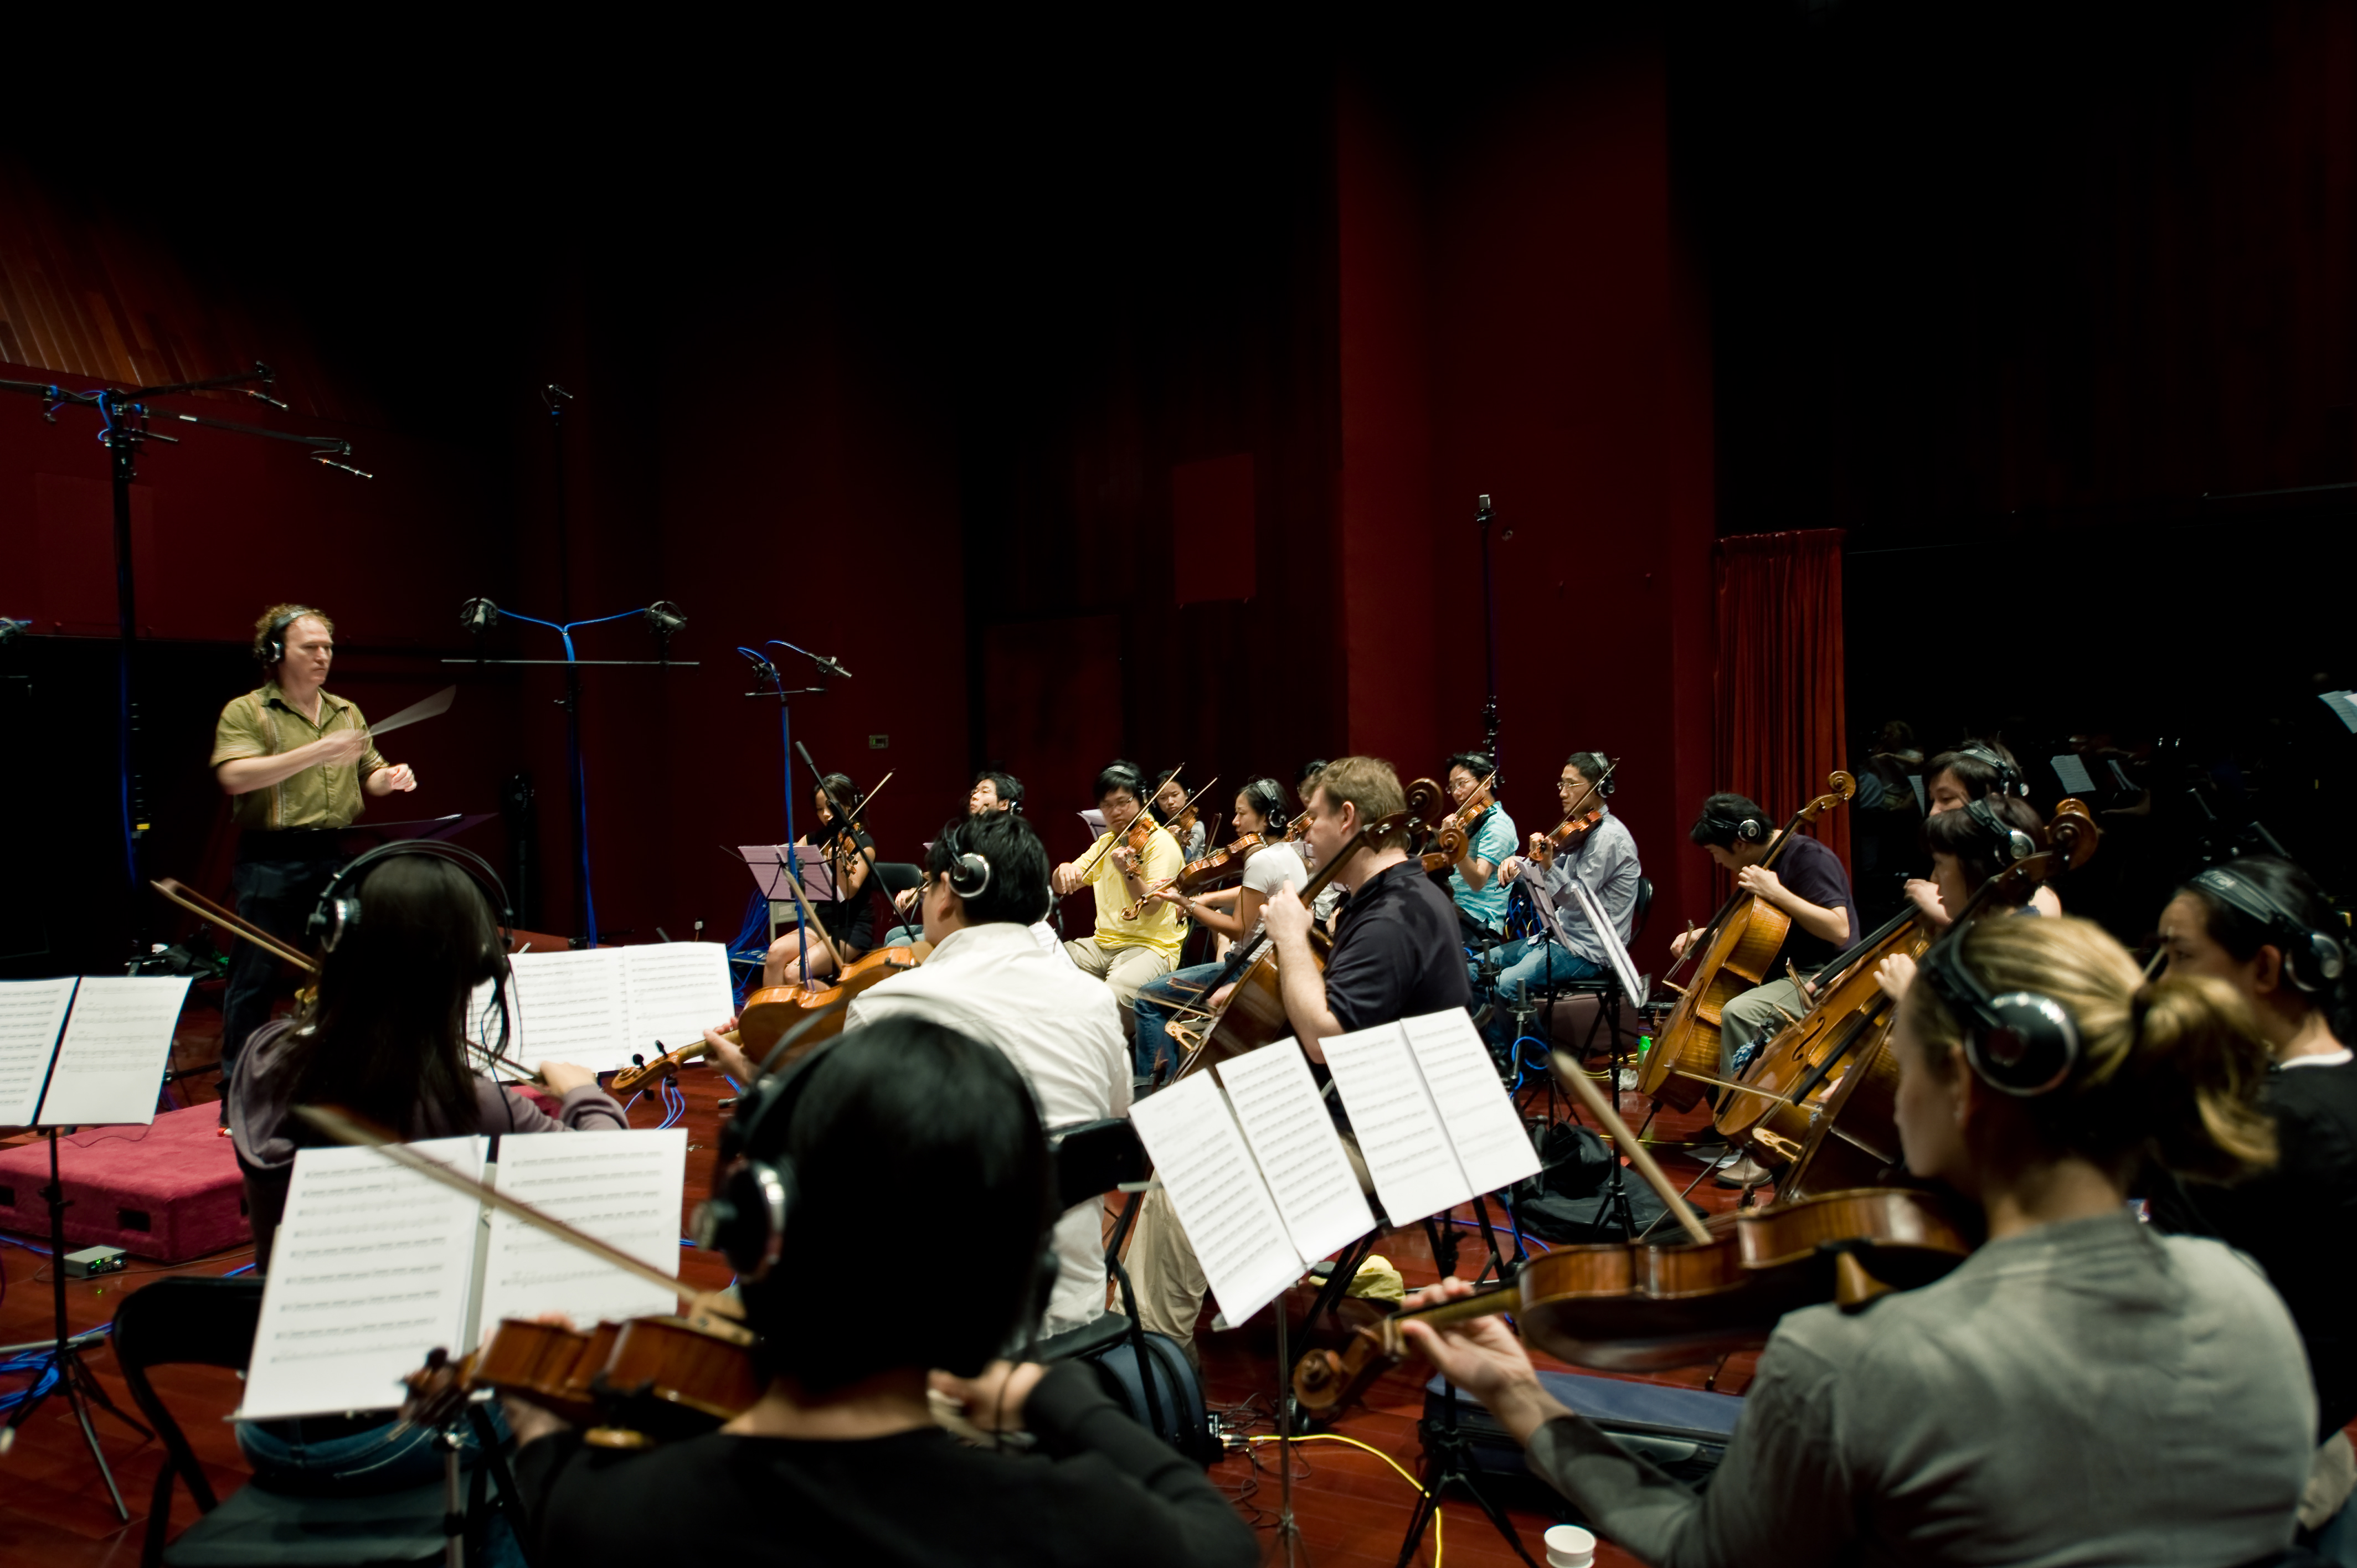 Robert is conducting members of the Hong Kong Philharmonic Orchestra for the film 